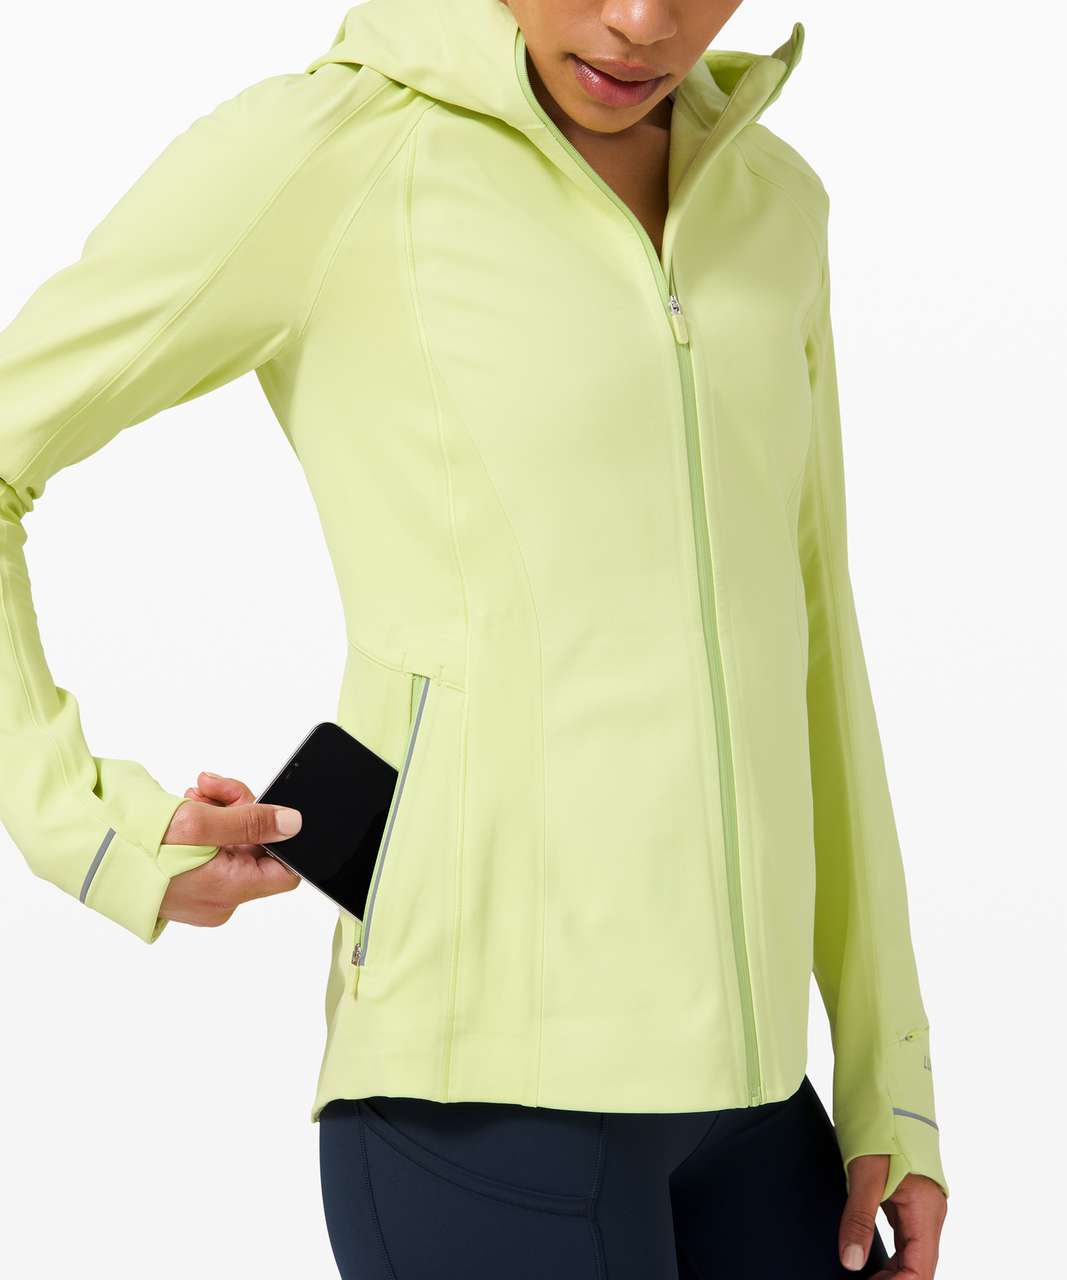 Lululemon Cross Chill Jacket Tan Size 4 - $73 (63% Off Retail) New With  Tags - From Stephanie